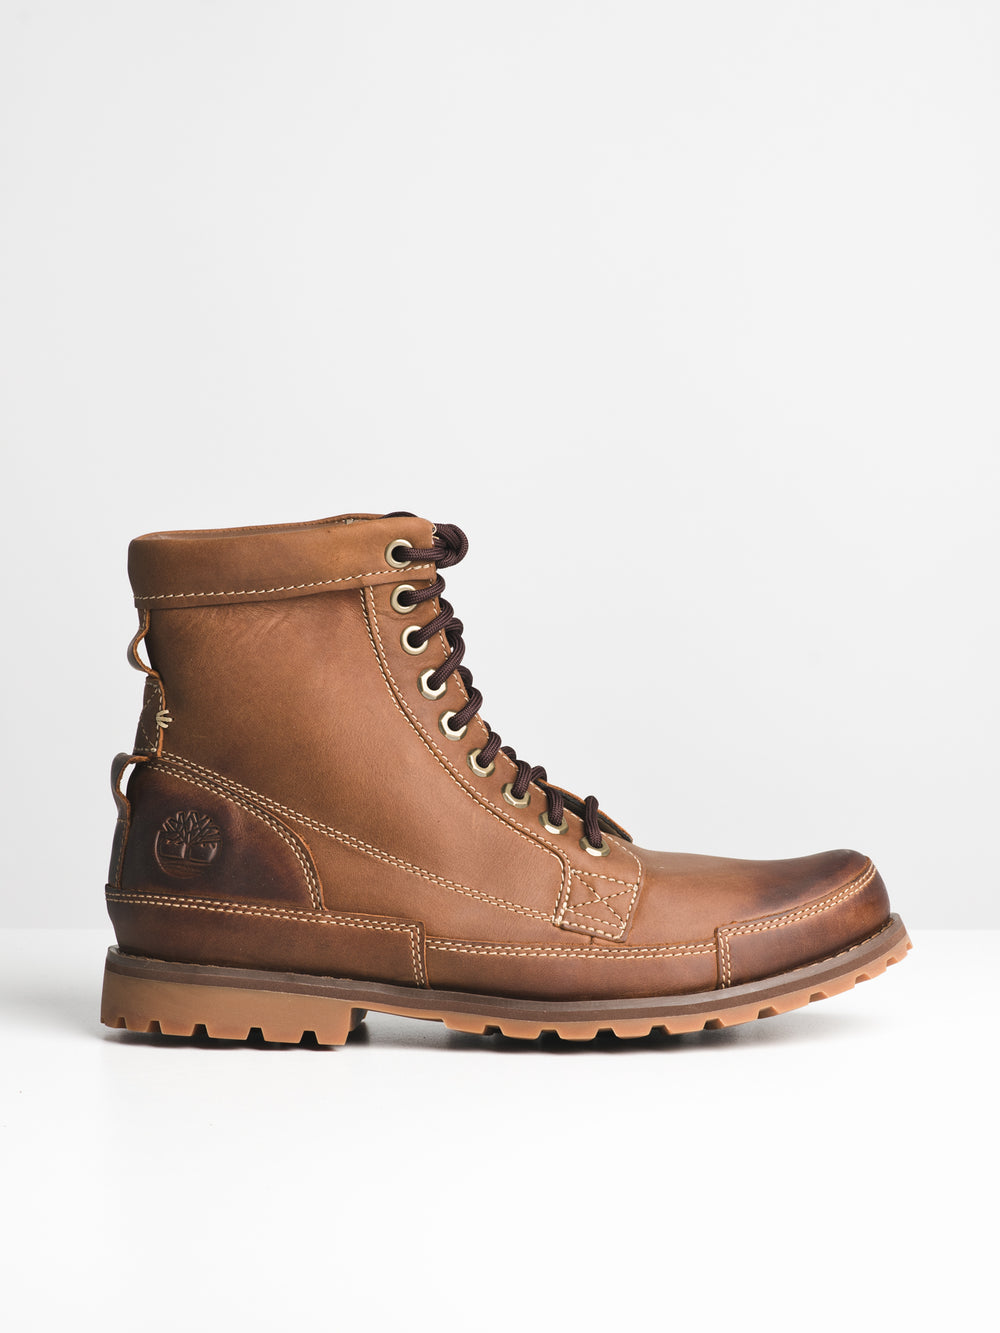 MENS EARTHKEEPERS 6' - MED BROWN - CLEARANCE